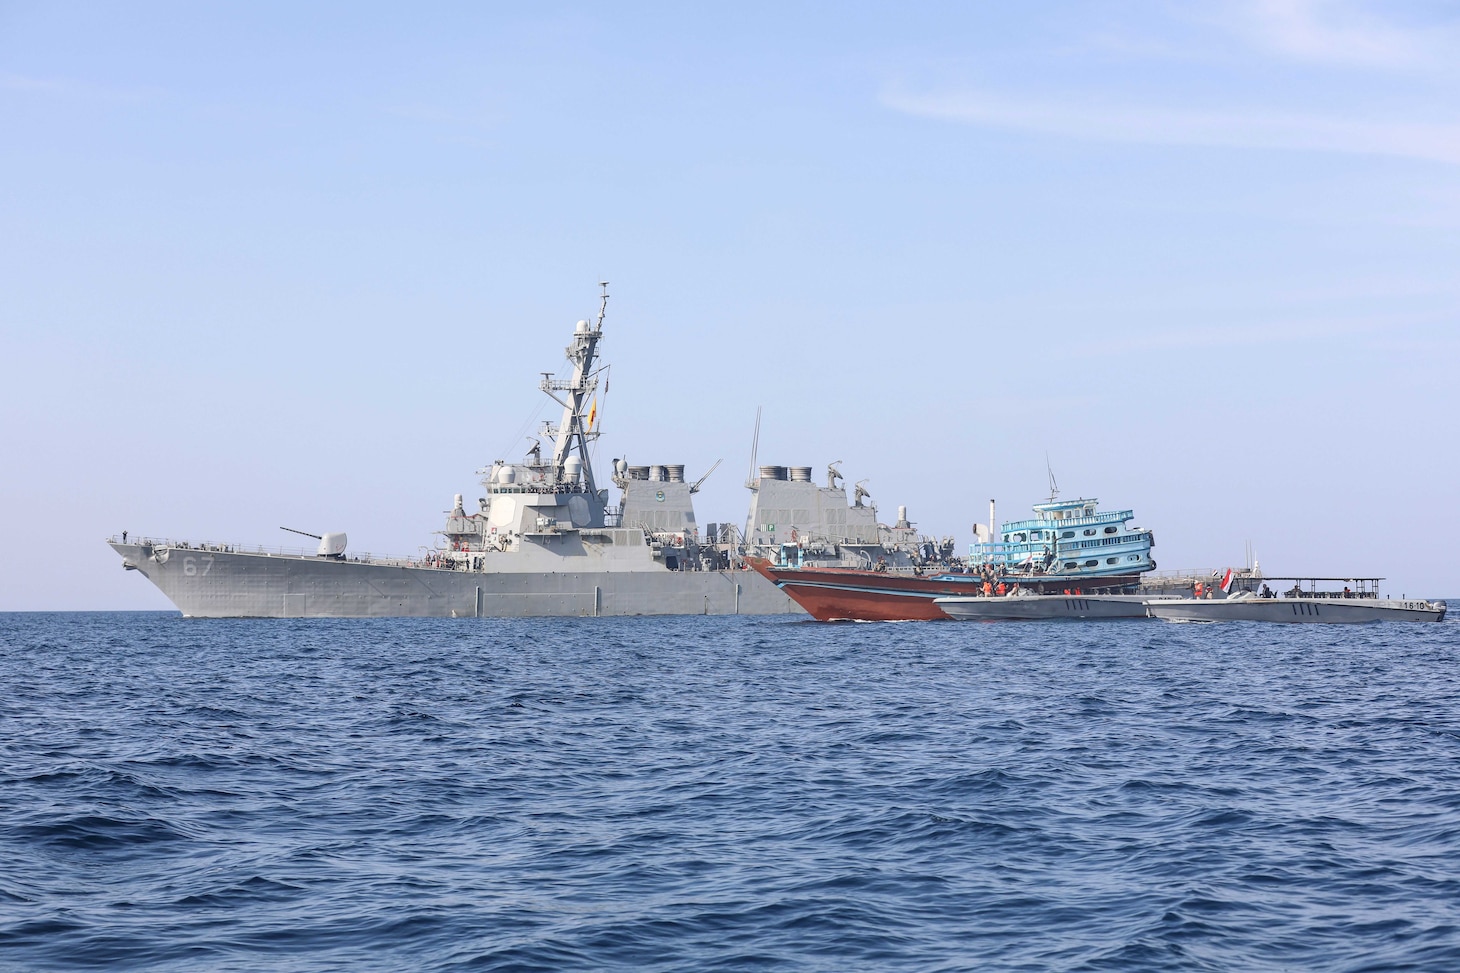 USS Cole (DDG 67) transfers control of a stateless fishing vessel to the Yemen Coast Guard in the Gulf of Oman.